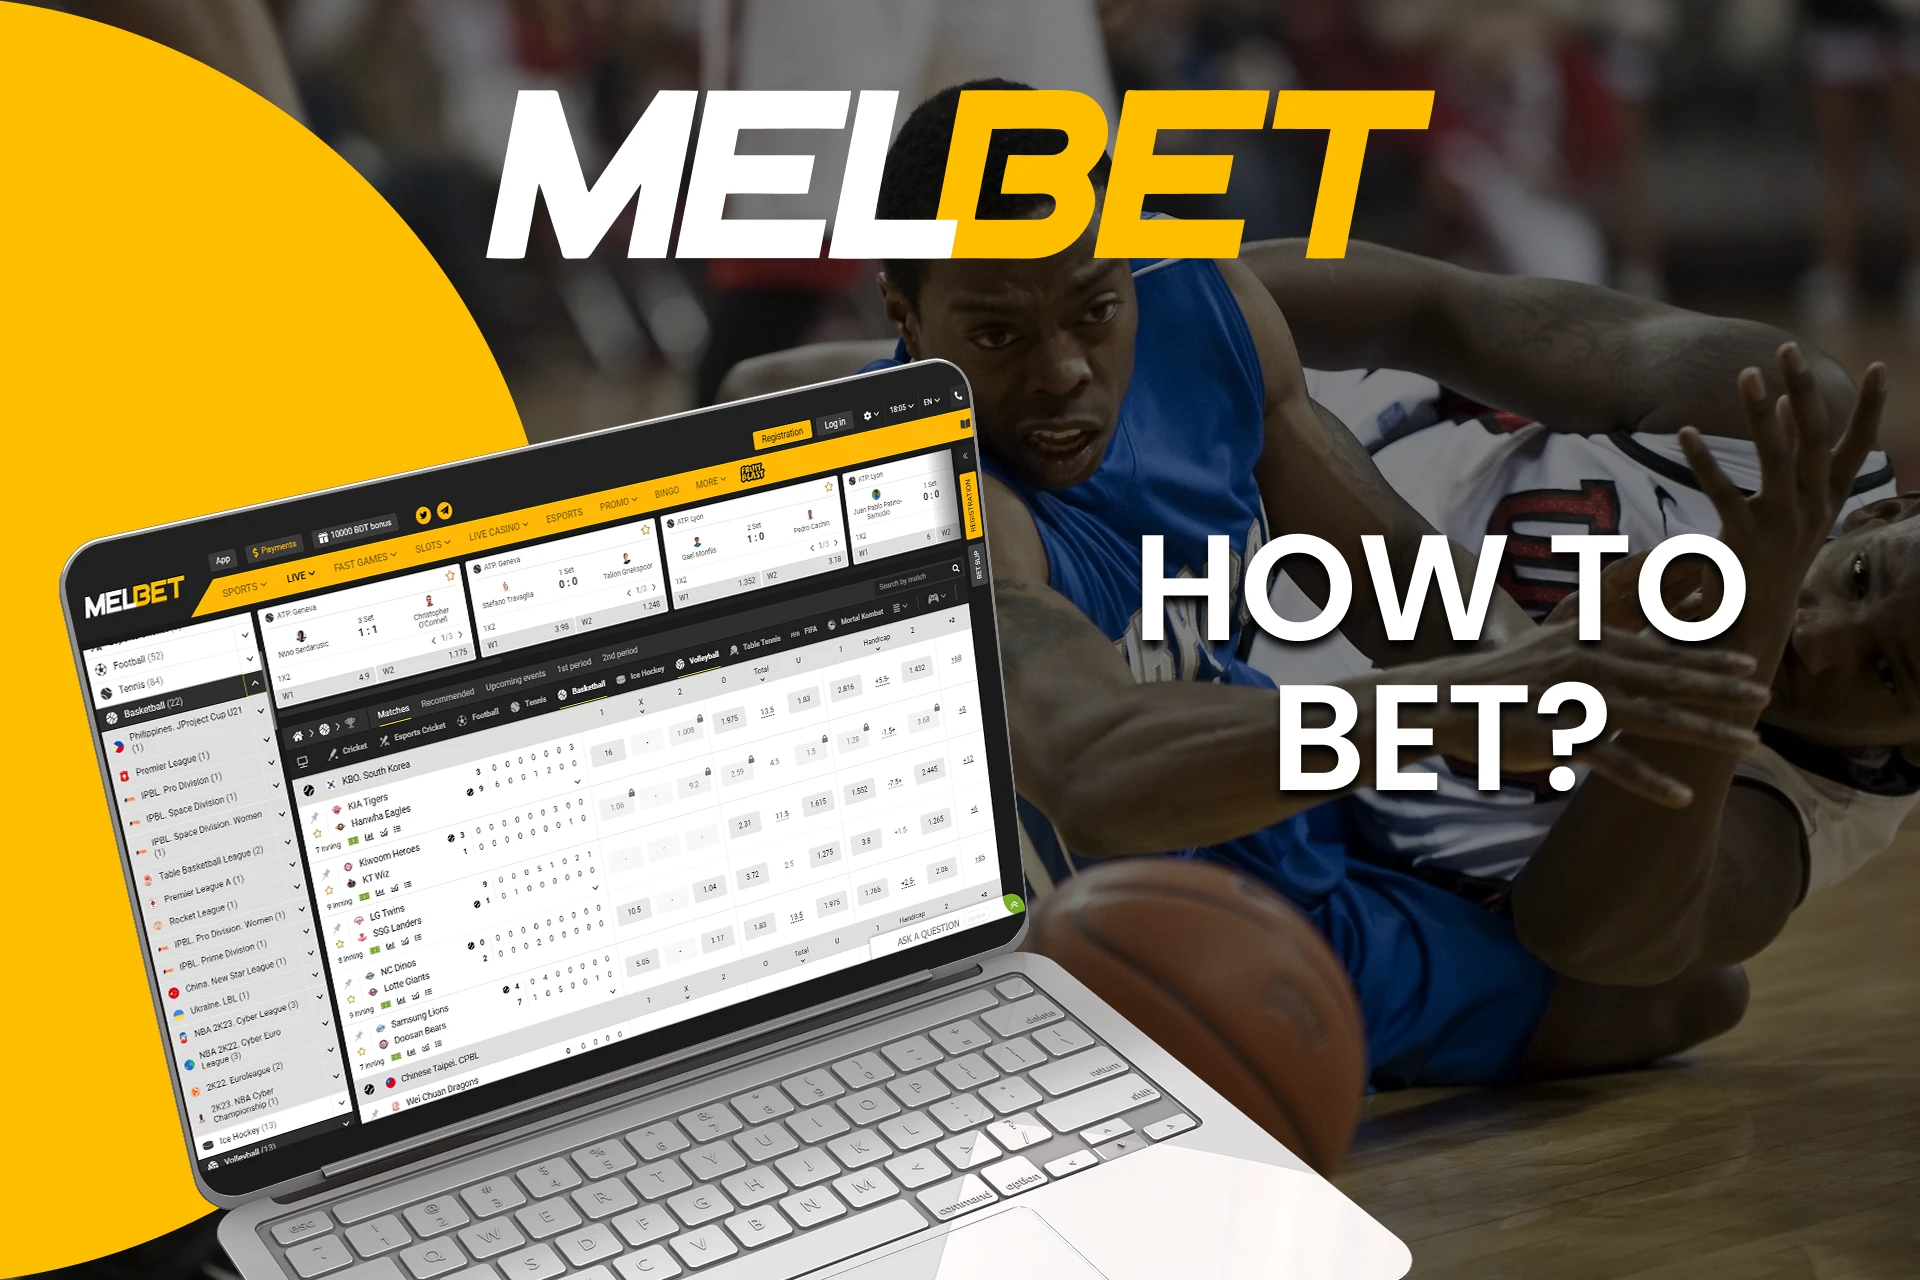 Go to the right section for betting on basketball from Melbet.